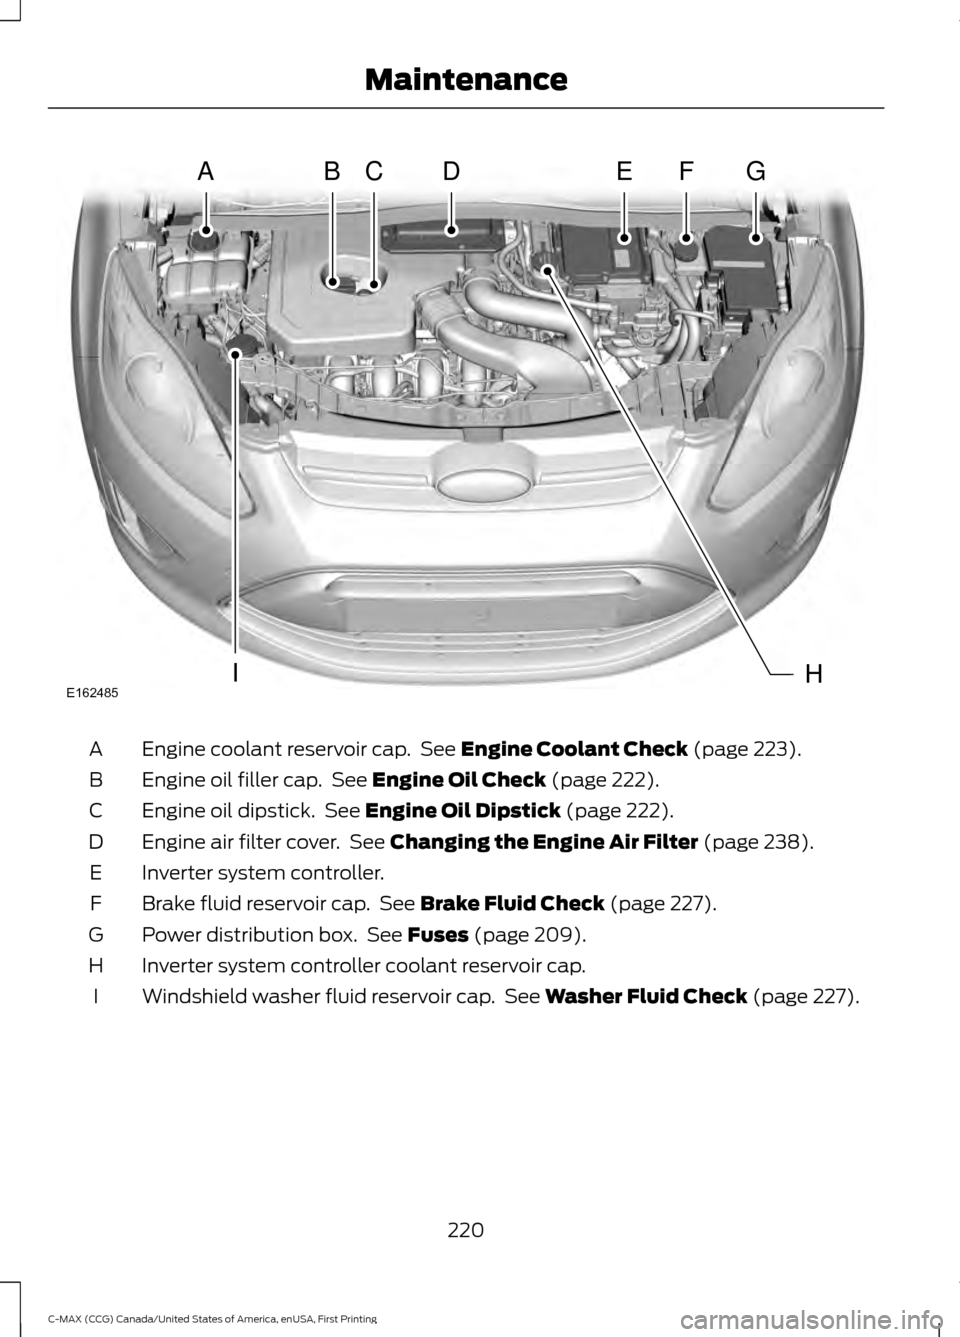 FORD C MAX HYBRID 2016 2.G User Guide Engine coolant reservoir cap.  See Engine Coolant Check (page 223).
A
Engine oil filler cap.  See 
Engine Oil Check (page 222).
B
Engine oil dipstick.  See 
Engine Oil Dipstick (page 222).
C
Engine ai